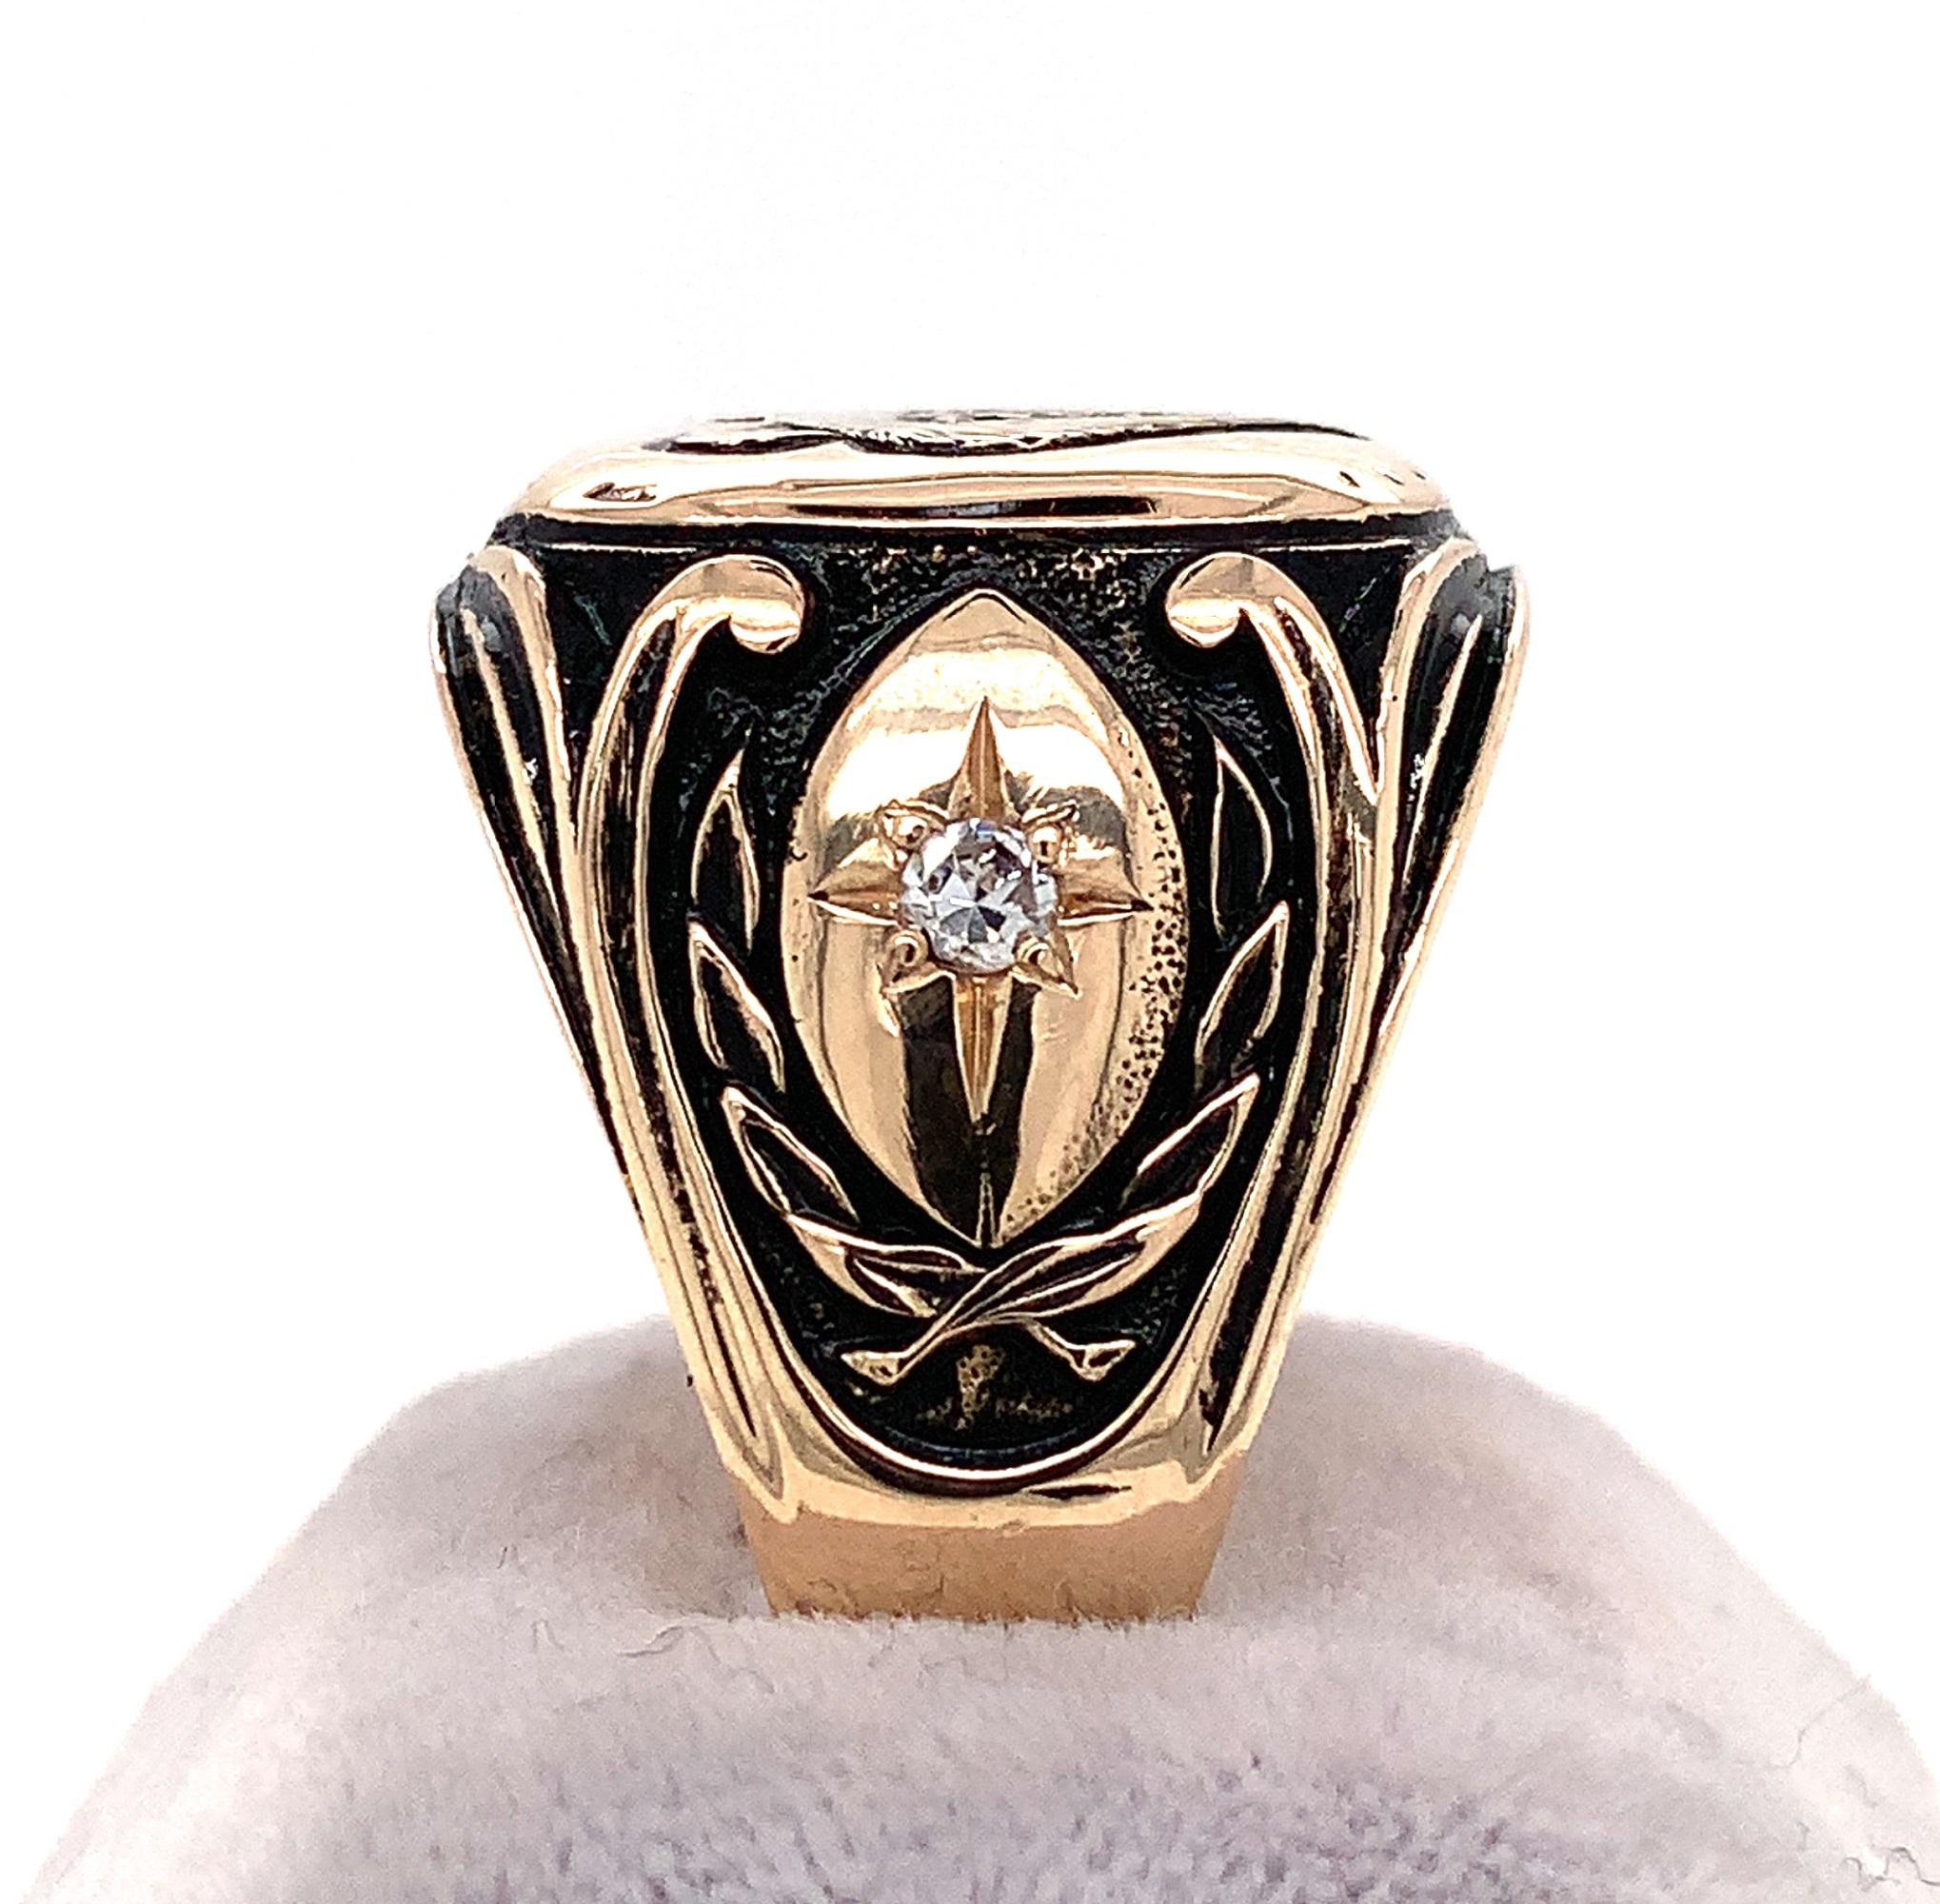 Incredible 14K yellow gold men's ring with a hand carved and chased bear. This is a very heavy cast ring weighing 16.62dwt or 25.84 grams. There are 2 round diamonds measuring about 2.5mm and weighing .12cts total. The ring fits a size 13 3/4 finger